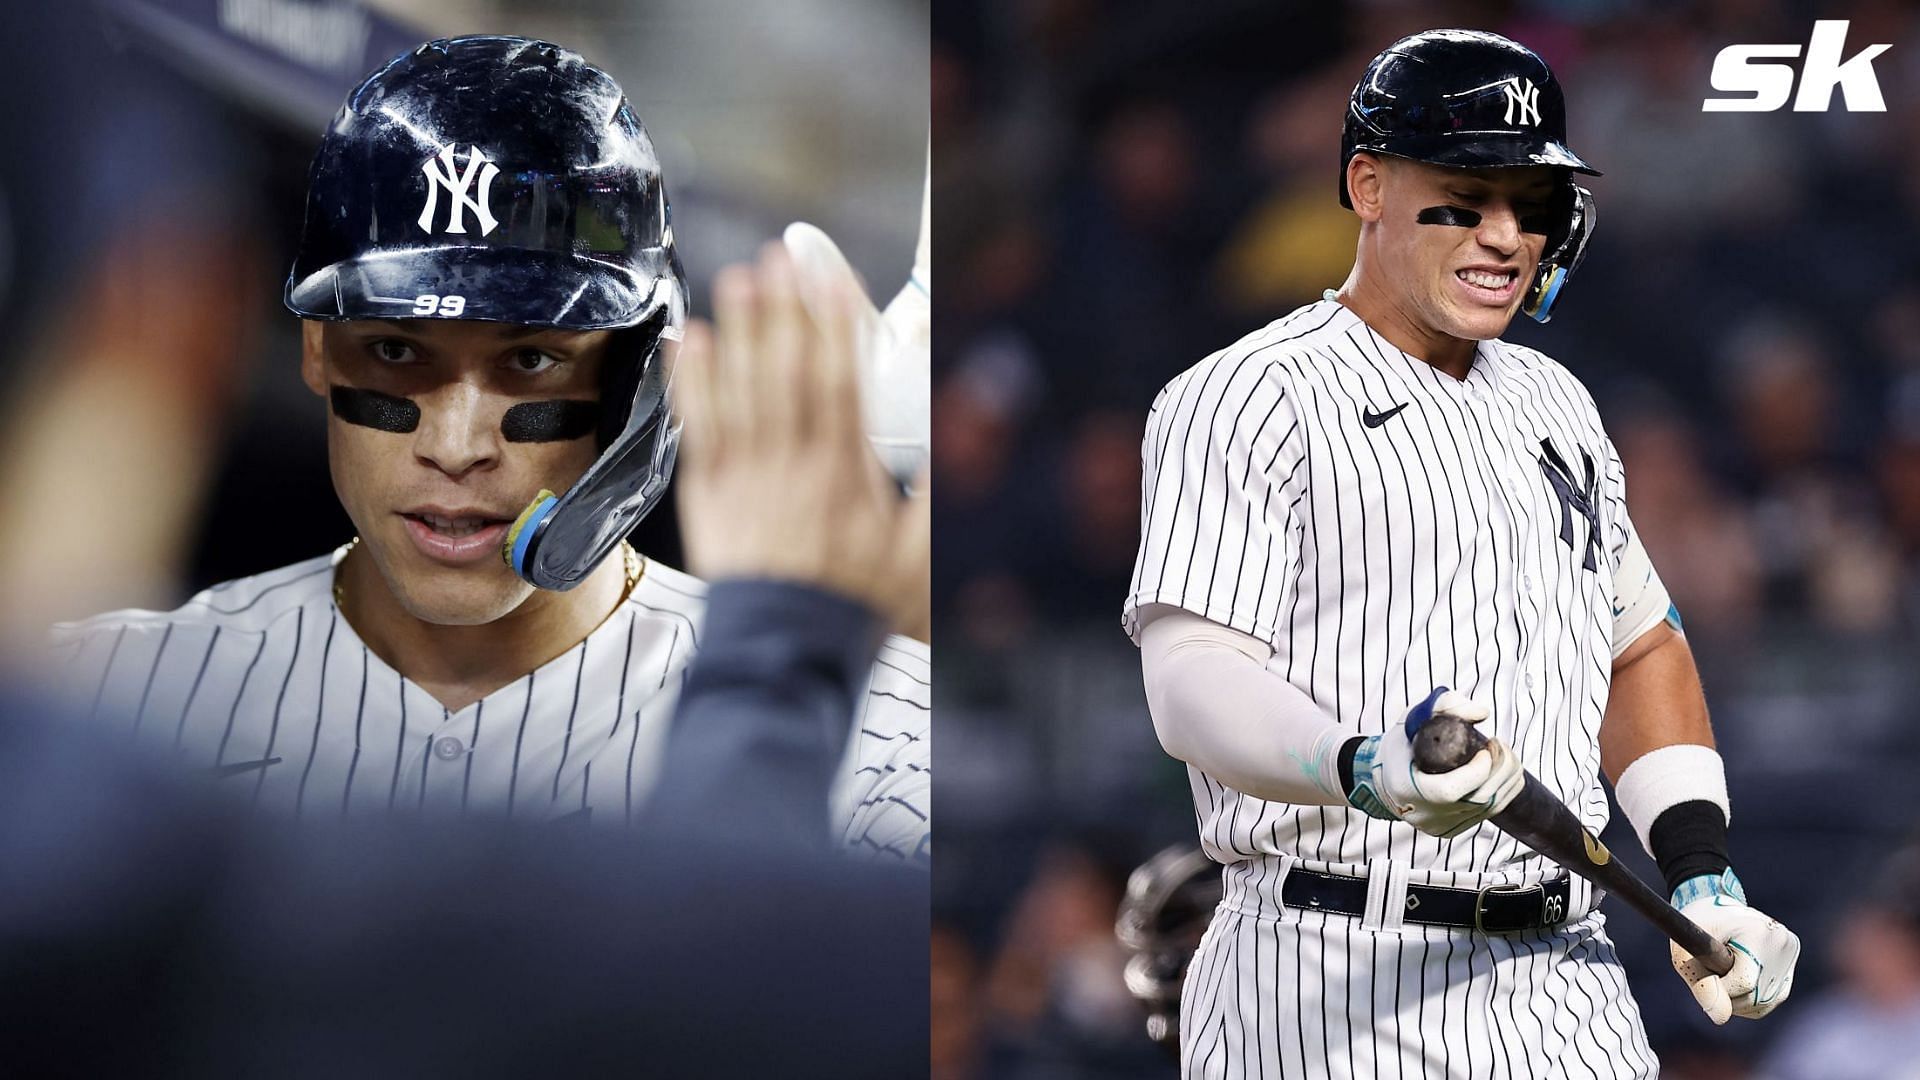 Aaron Judge absent from Yankees batting practice groups amid rumors of return to hitting